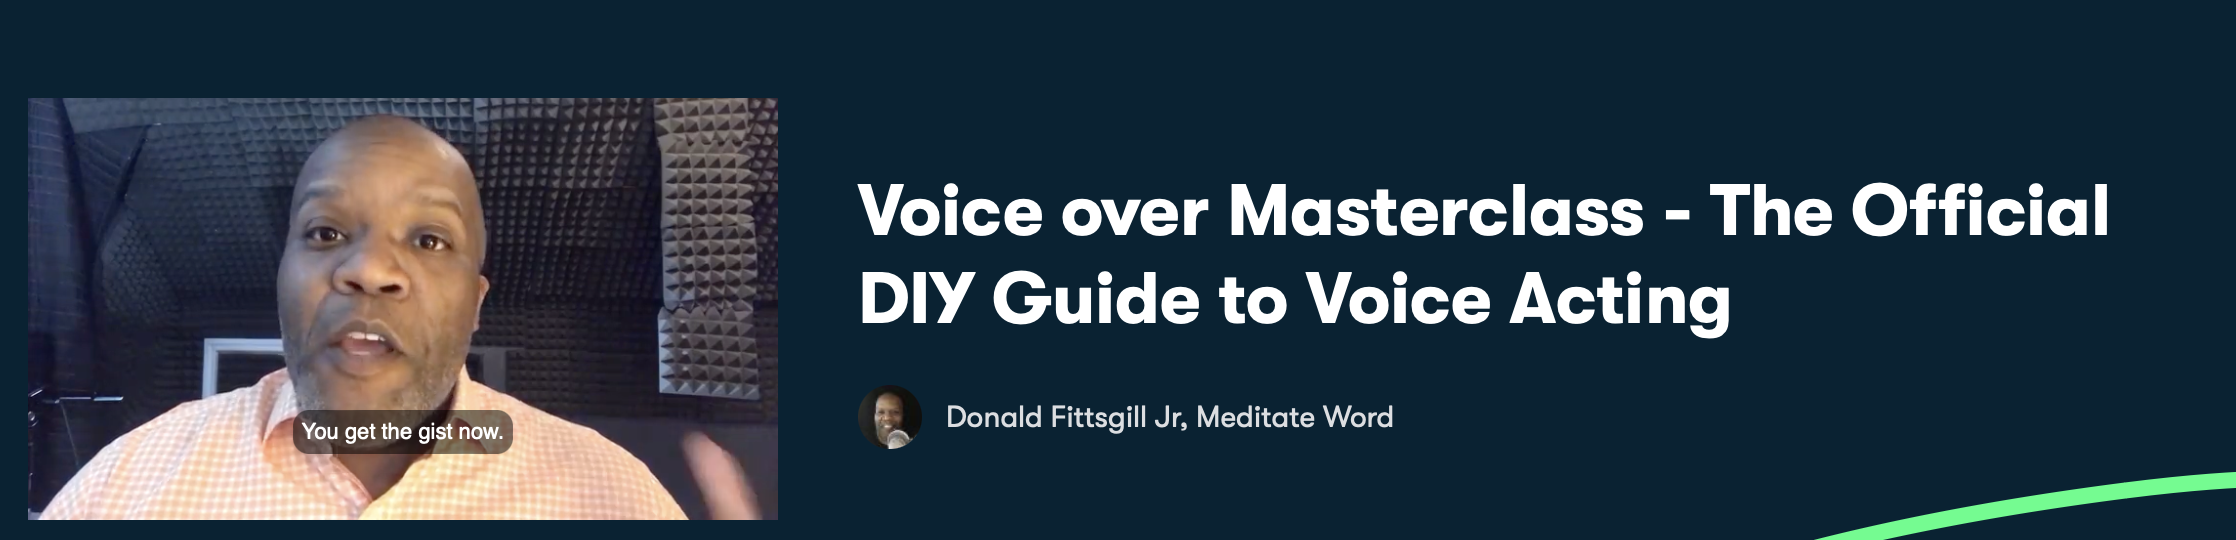 The Official DIY Guide to Voice Acting